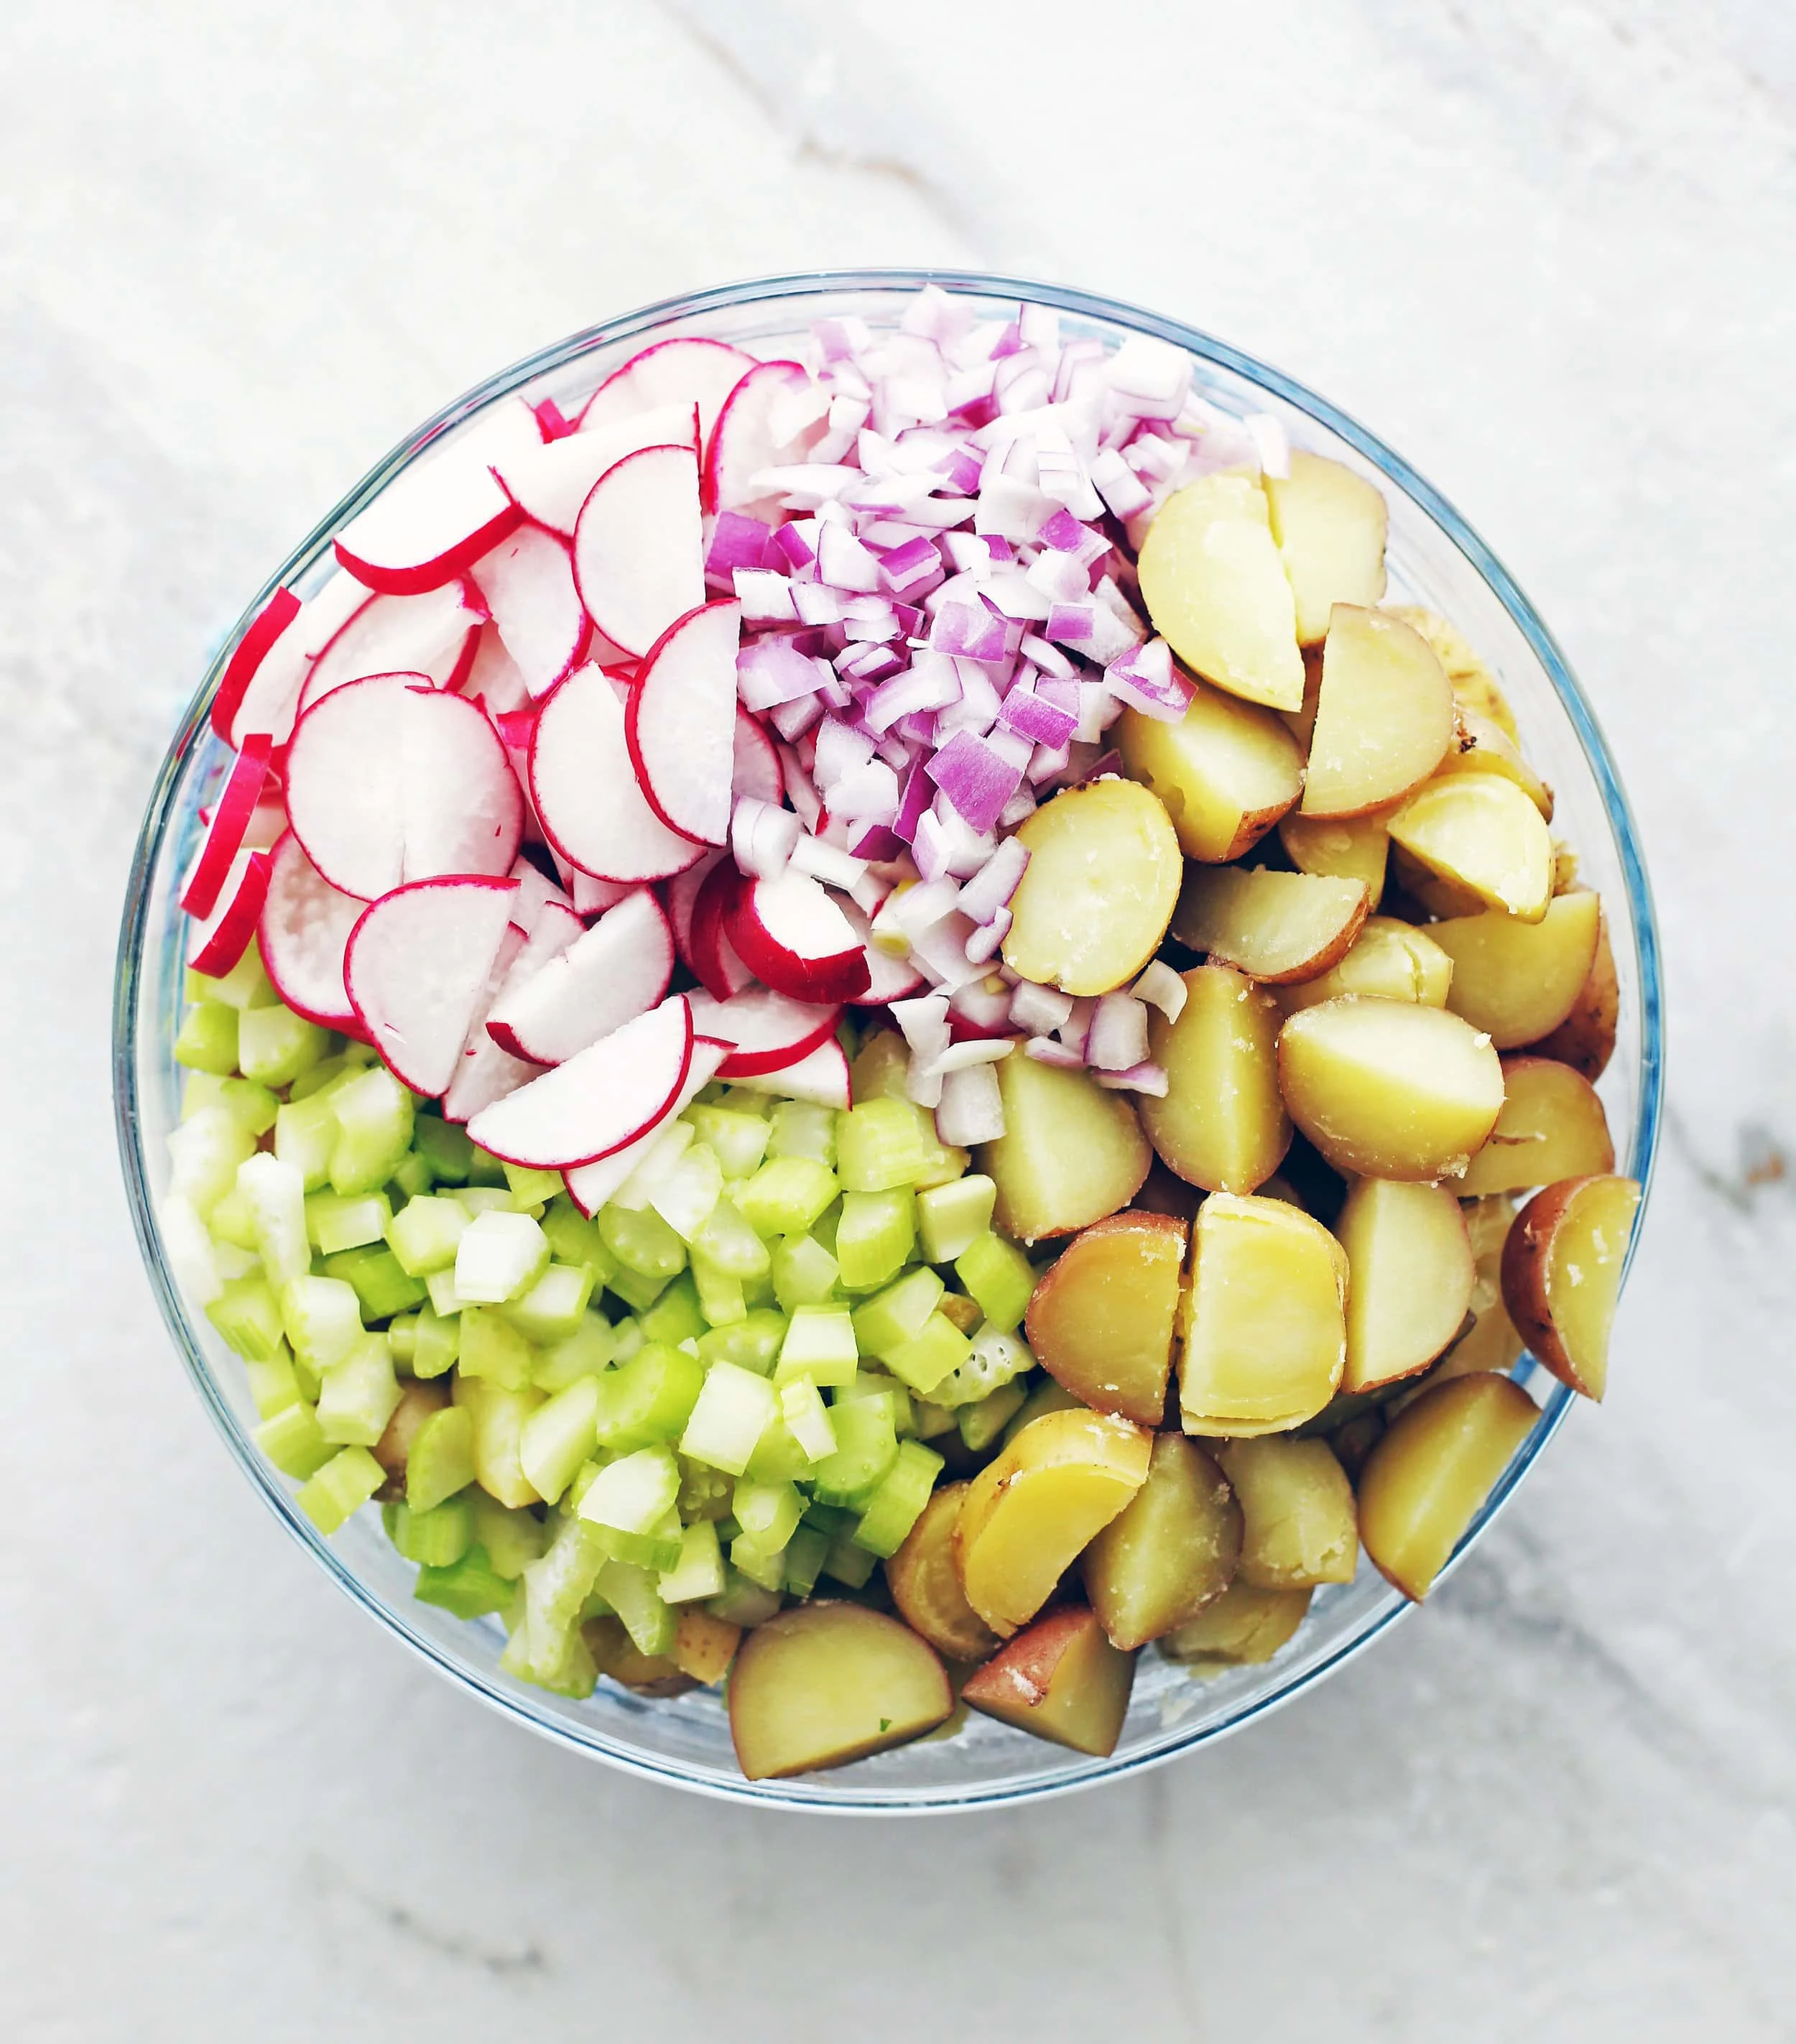 Boiled sliced potatoes, diced celery and red onions, and sliced radishes in a large glass bowl.